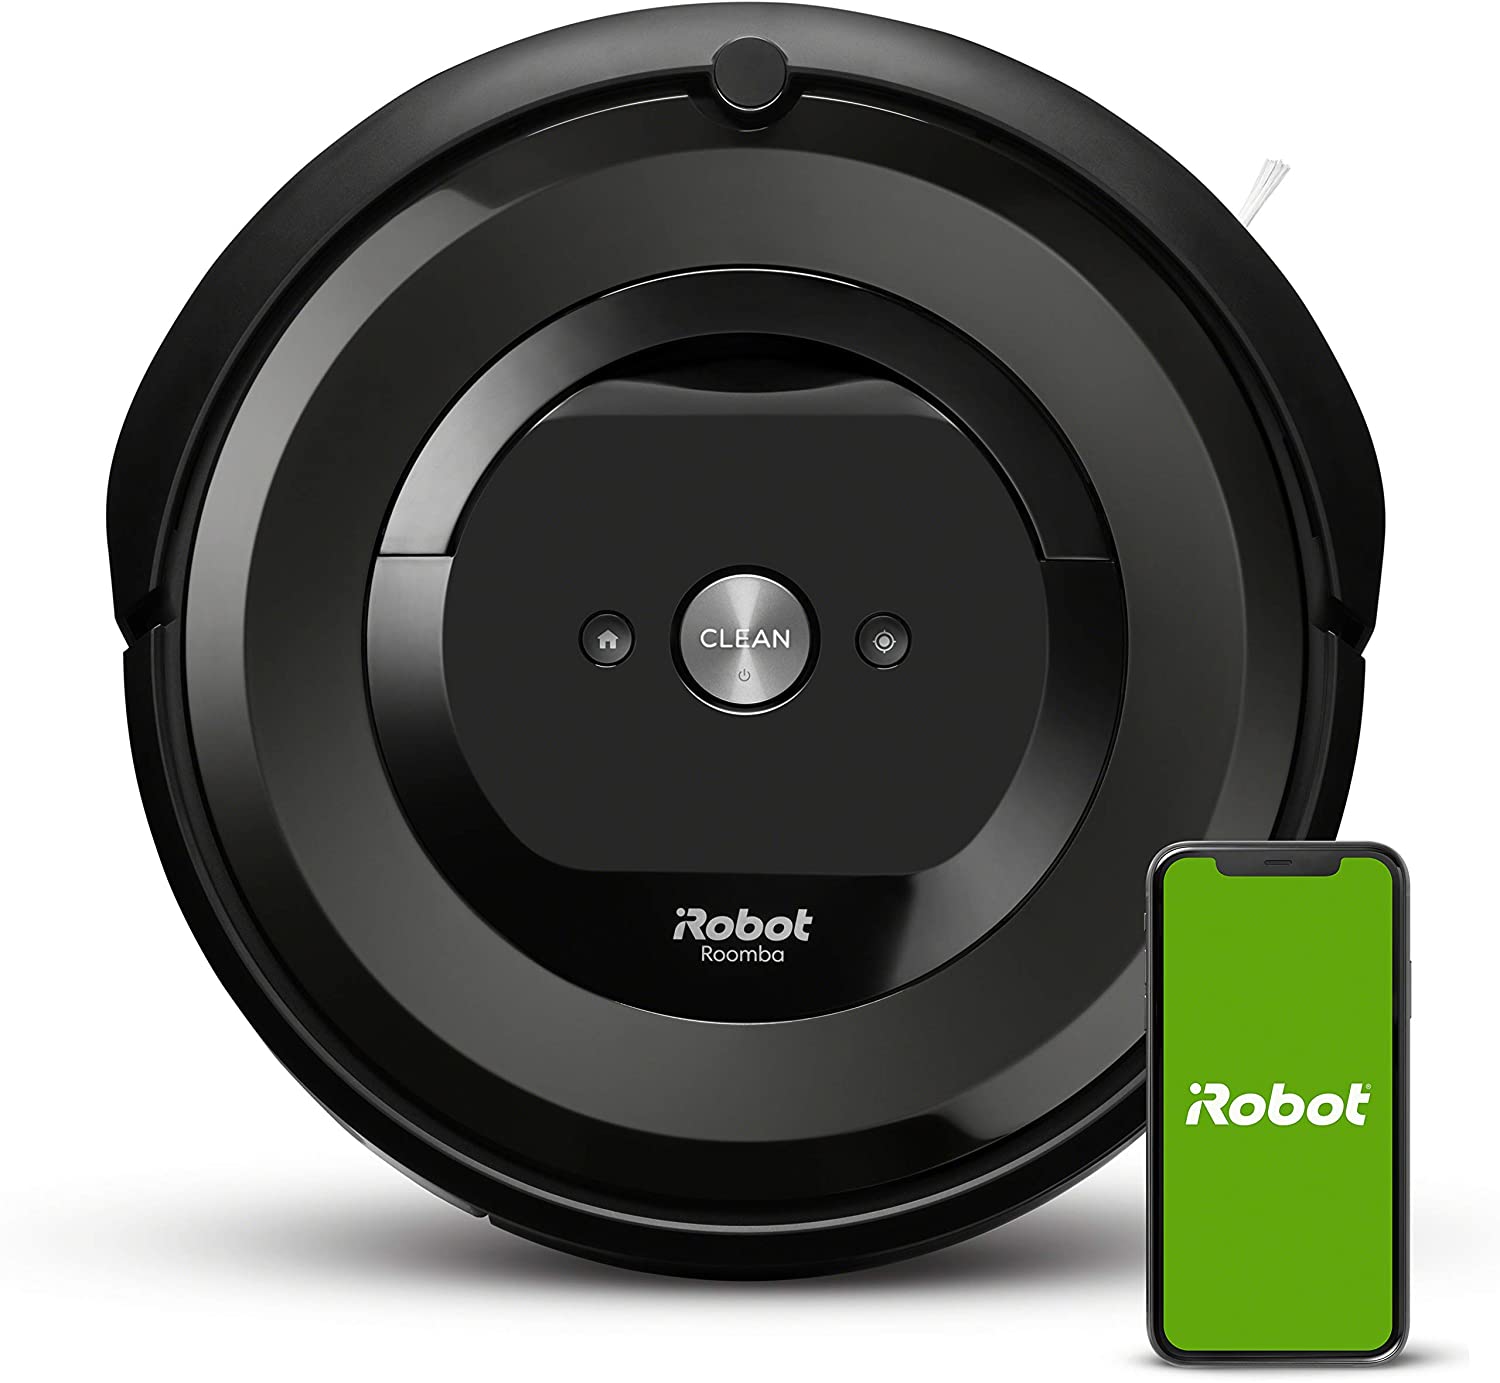 iRobot Roomba E5 (5150) Robot Vacuum - Wi-Fi Connected, Works with Alexa, Ideal for Pet Hair, Carpets, Hard, Self-Charging Robotic Vacuum, Black - image 1 of 3